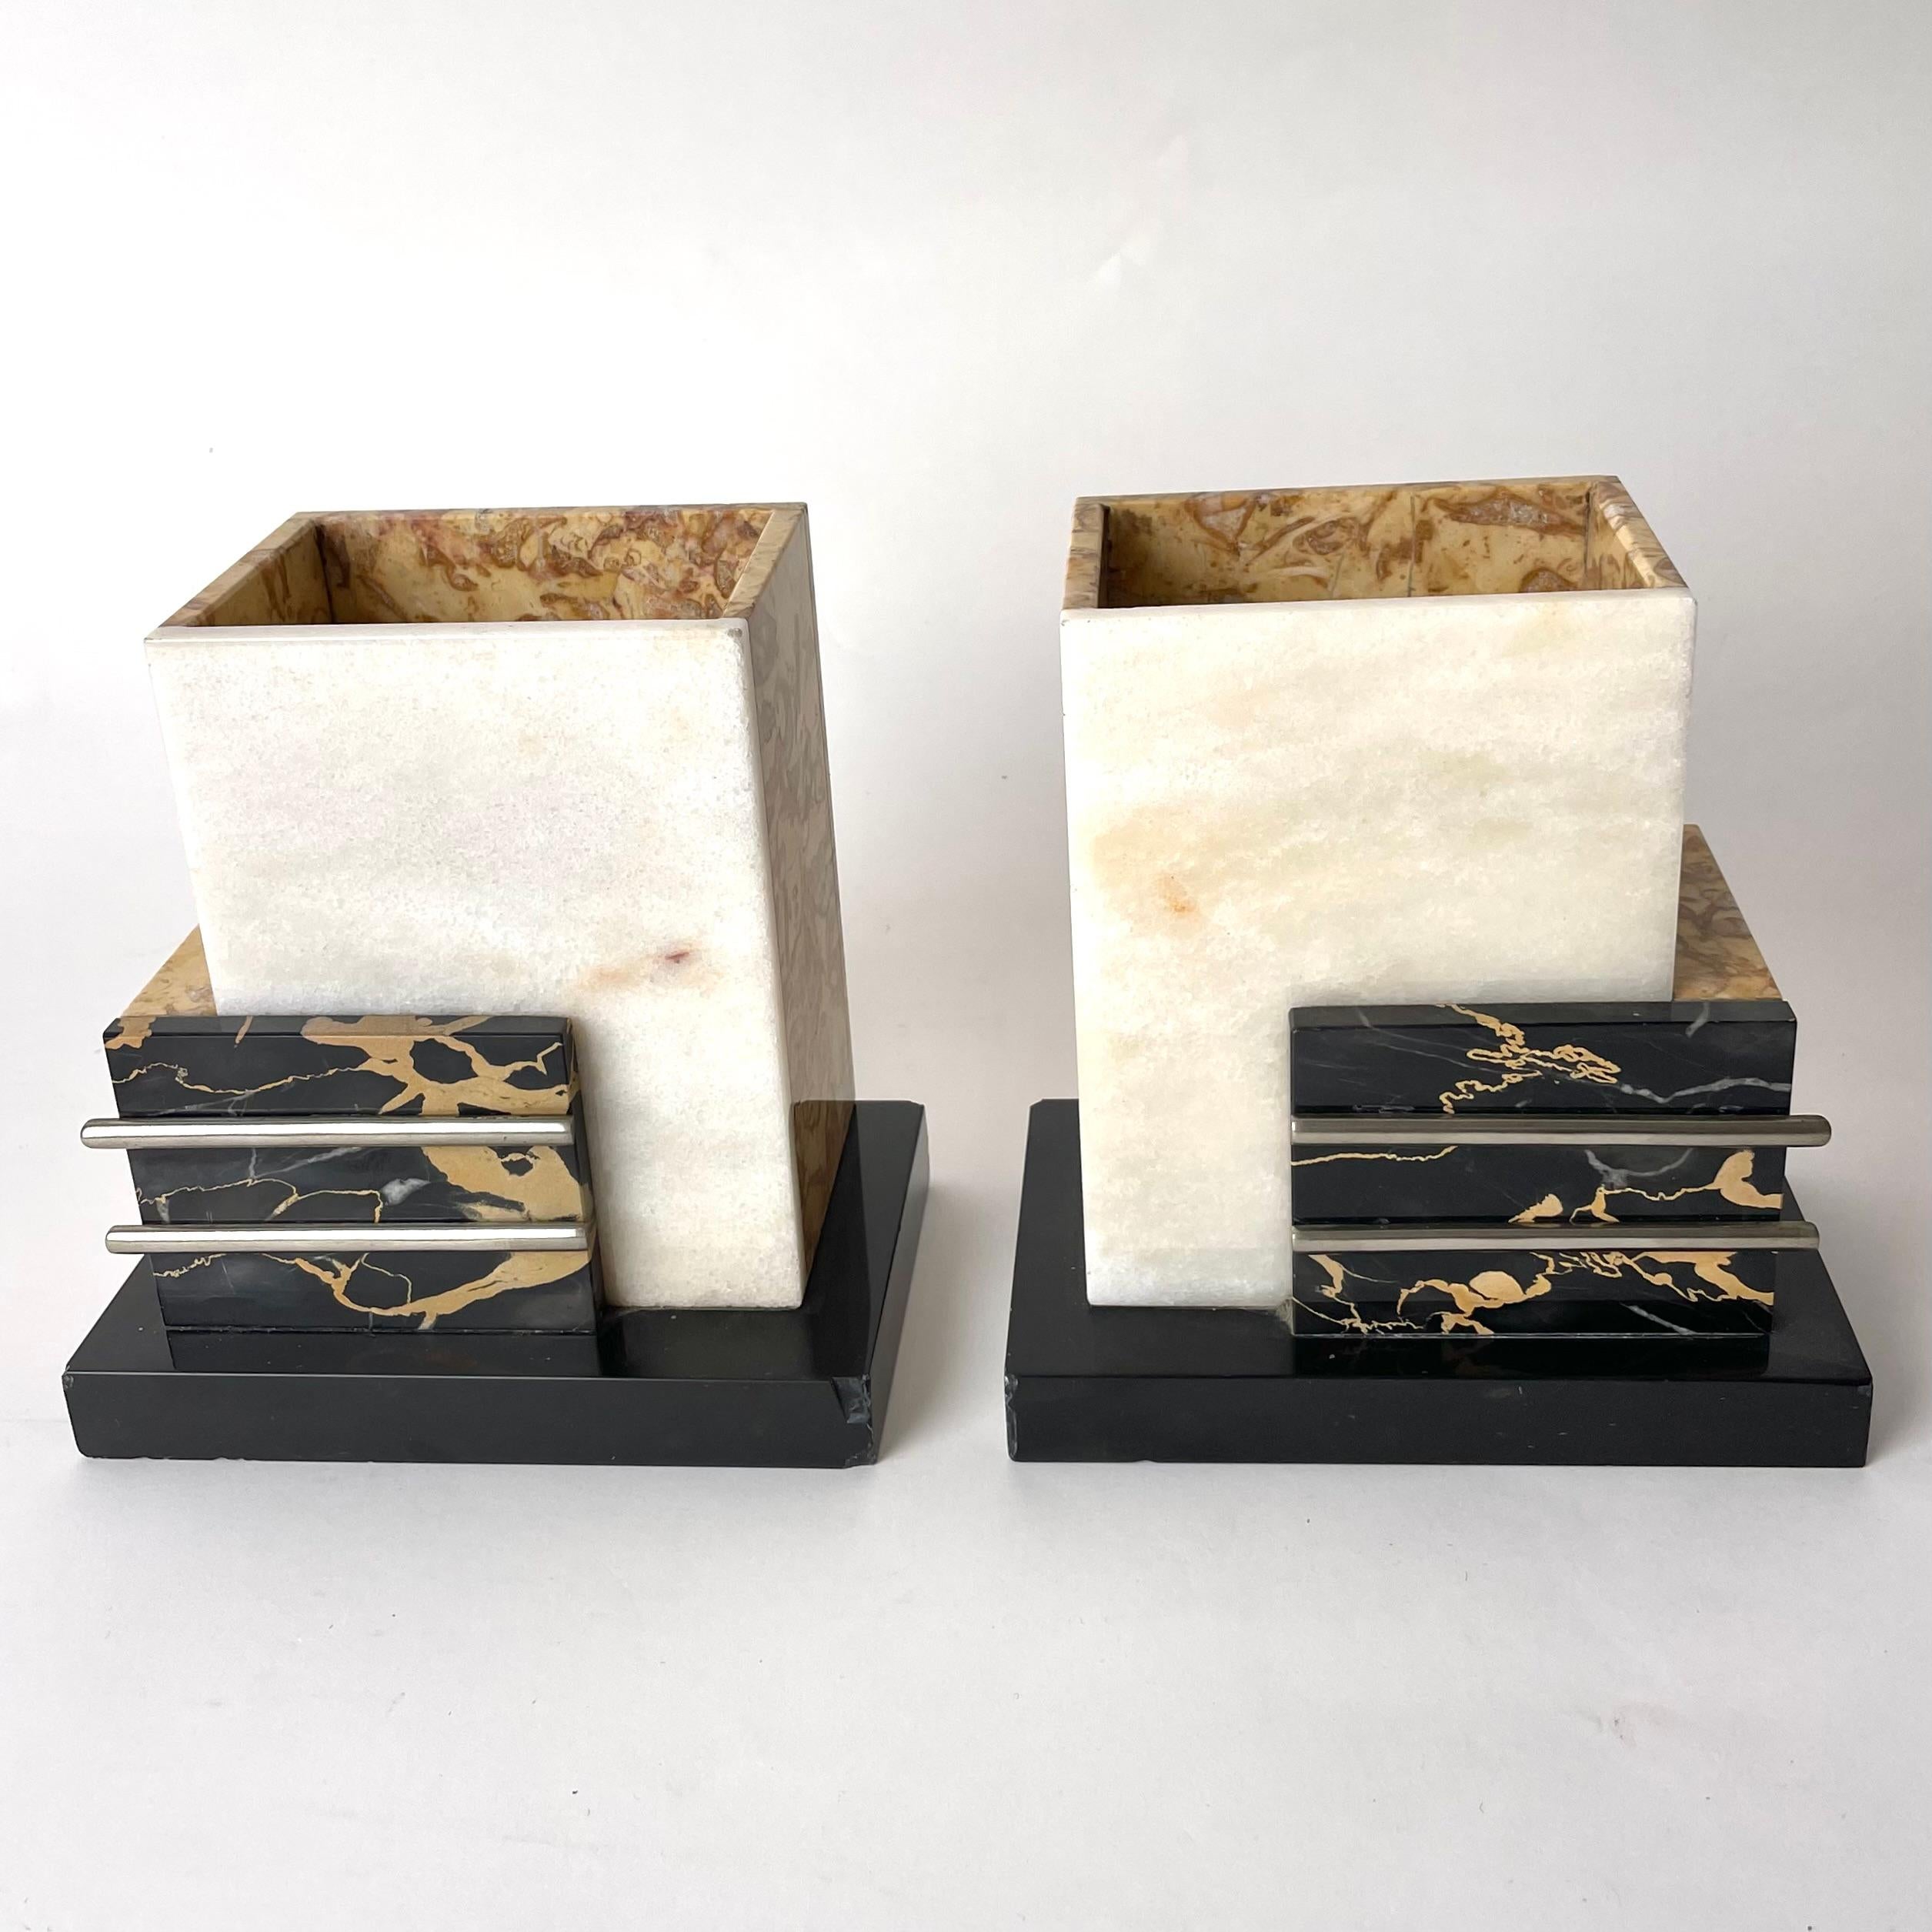 Elegant Decorative Sculptural Pieces usable for storage of e.g. cufflinks or as bookends. 1920s Art Deco, made of Marble and Chrome.

These highly decorative and elegant pieces, in total consisting of four different kinds of exclusive marble, are